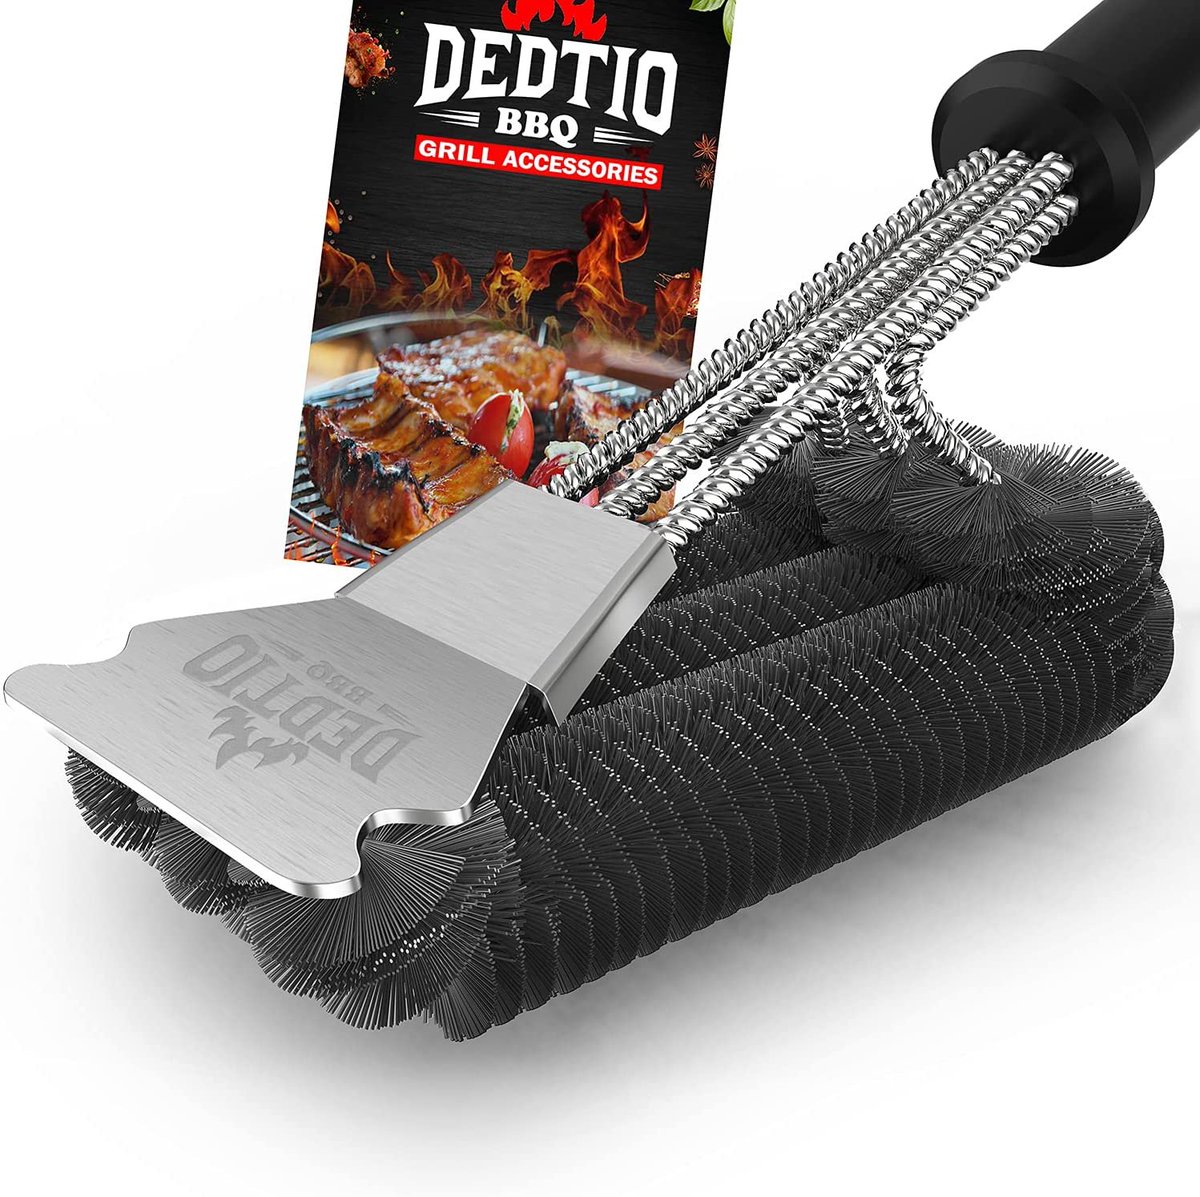 DONT MISS THIS 

Grill Brush and Scraper

Only $6.00!!

Use Promo Code 607W3CZZ

